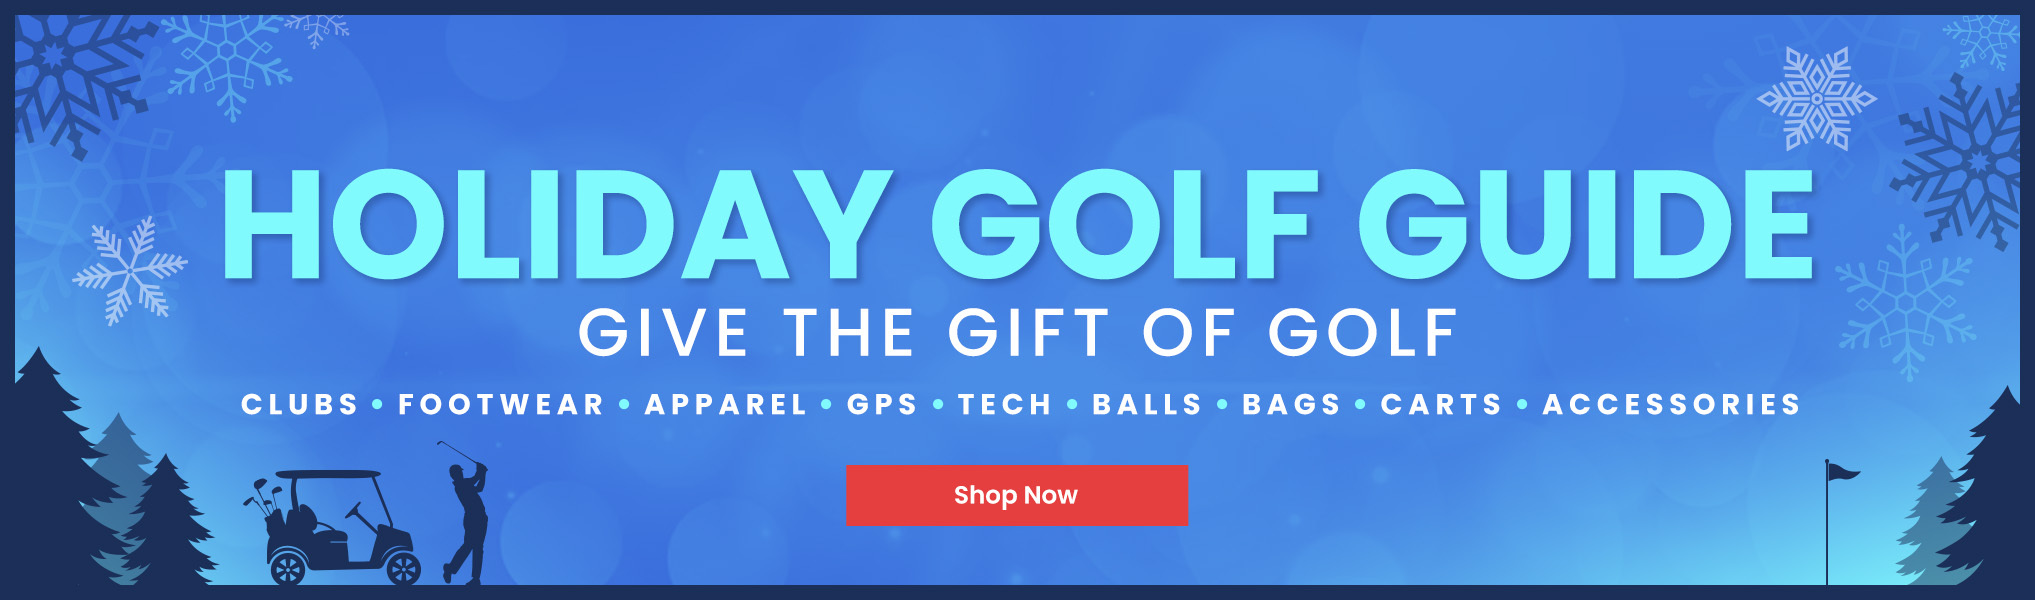 Holiday Golf Guide